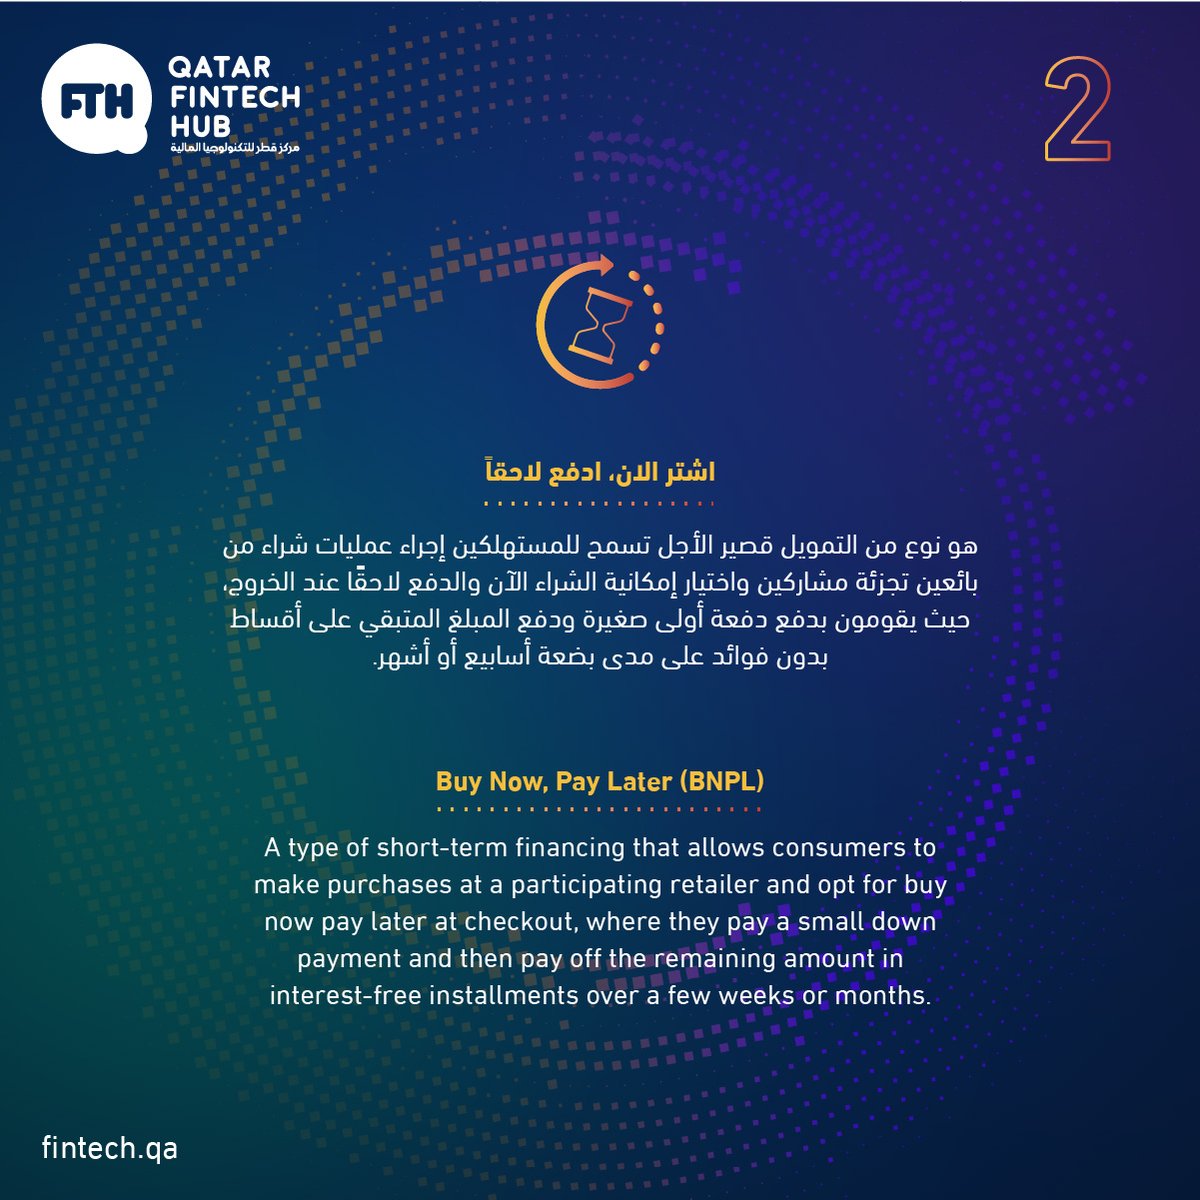 Don’t miss the opportunity to join the 5th wave of the QFTH Incubator and Accelerator Program, which covers four different themes: PayTech, (Buy Now, Pay Later), InsurTech, and Loan-Based Crowdfunding.

#qatar #fintech #qfth #fintechstartups #wave5